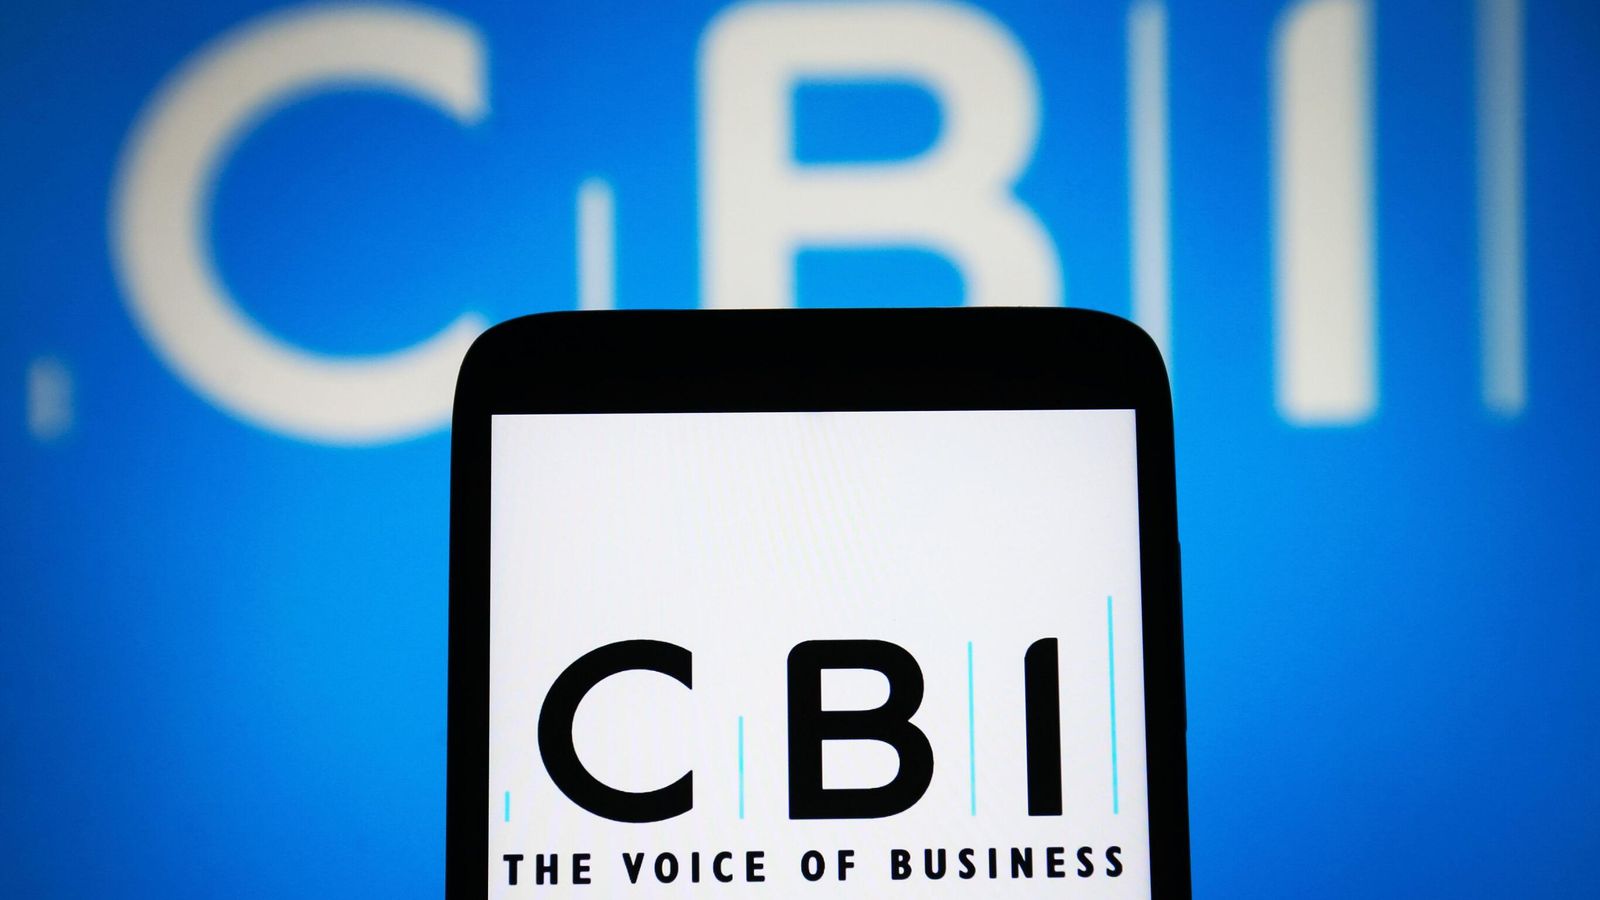 CBI board takes advice on insolvency ahead of crunch member vote